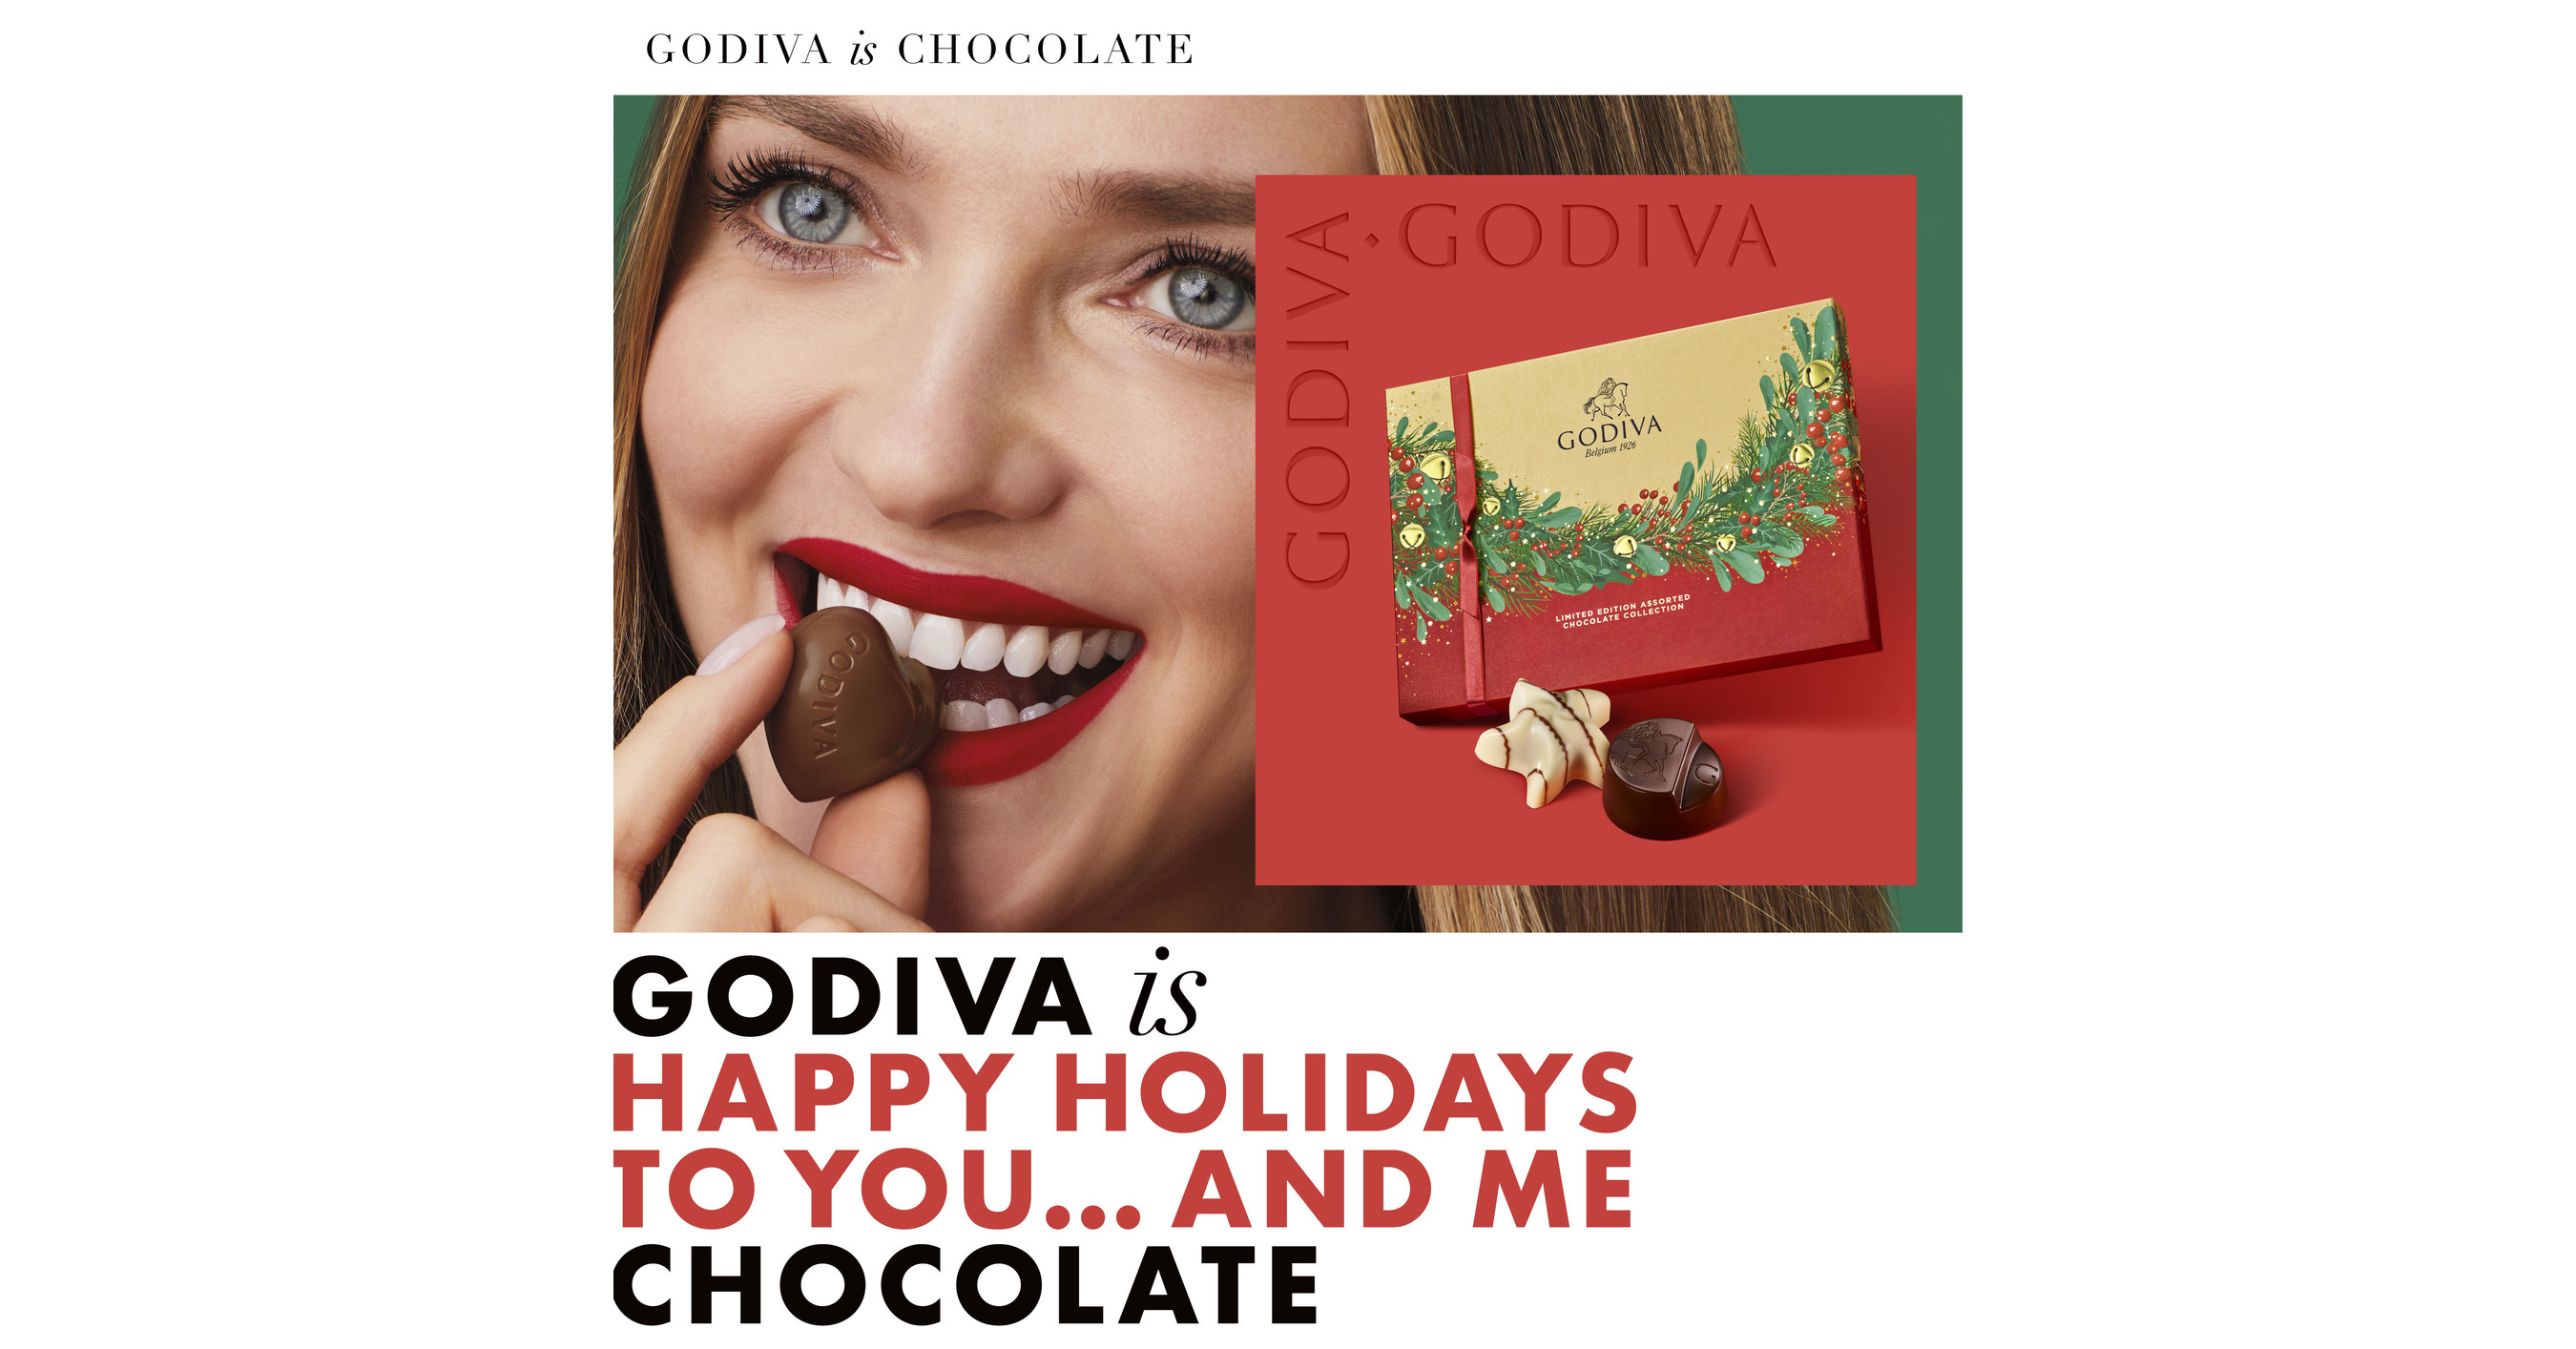 GODIVA LAUNCHES NEW LIMITEDEDITION 2022 HOLIDAY GOLD COLLECTION AND